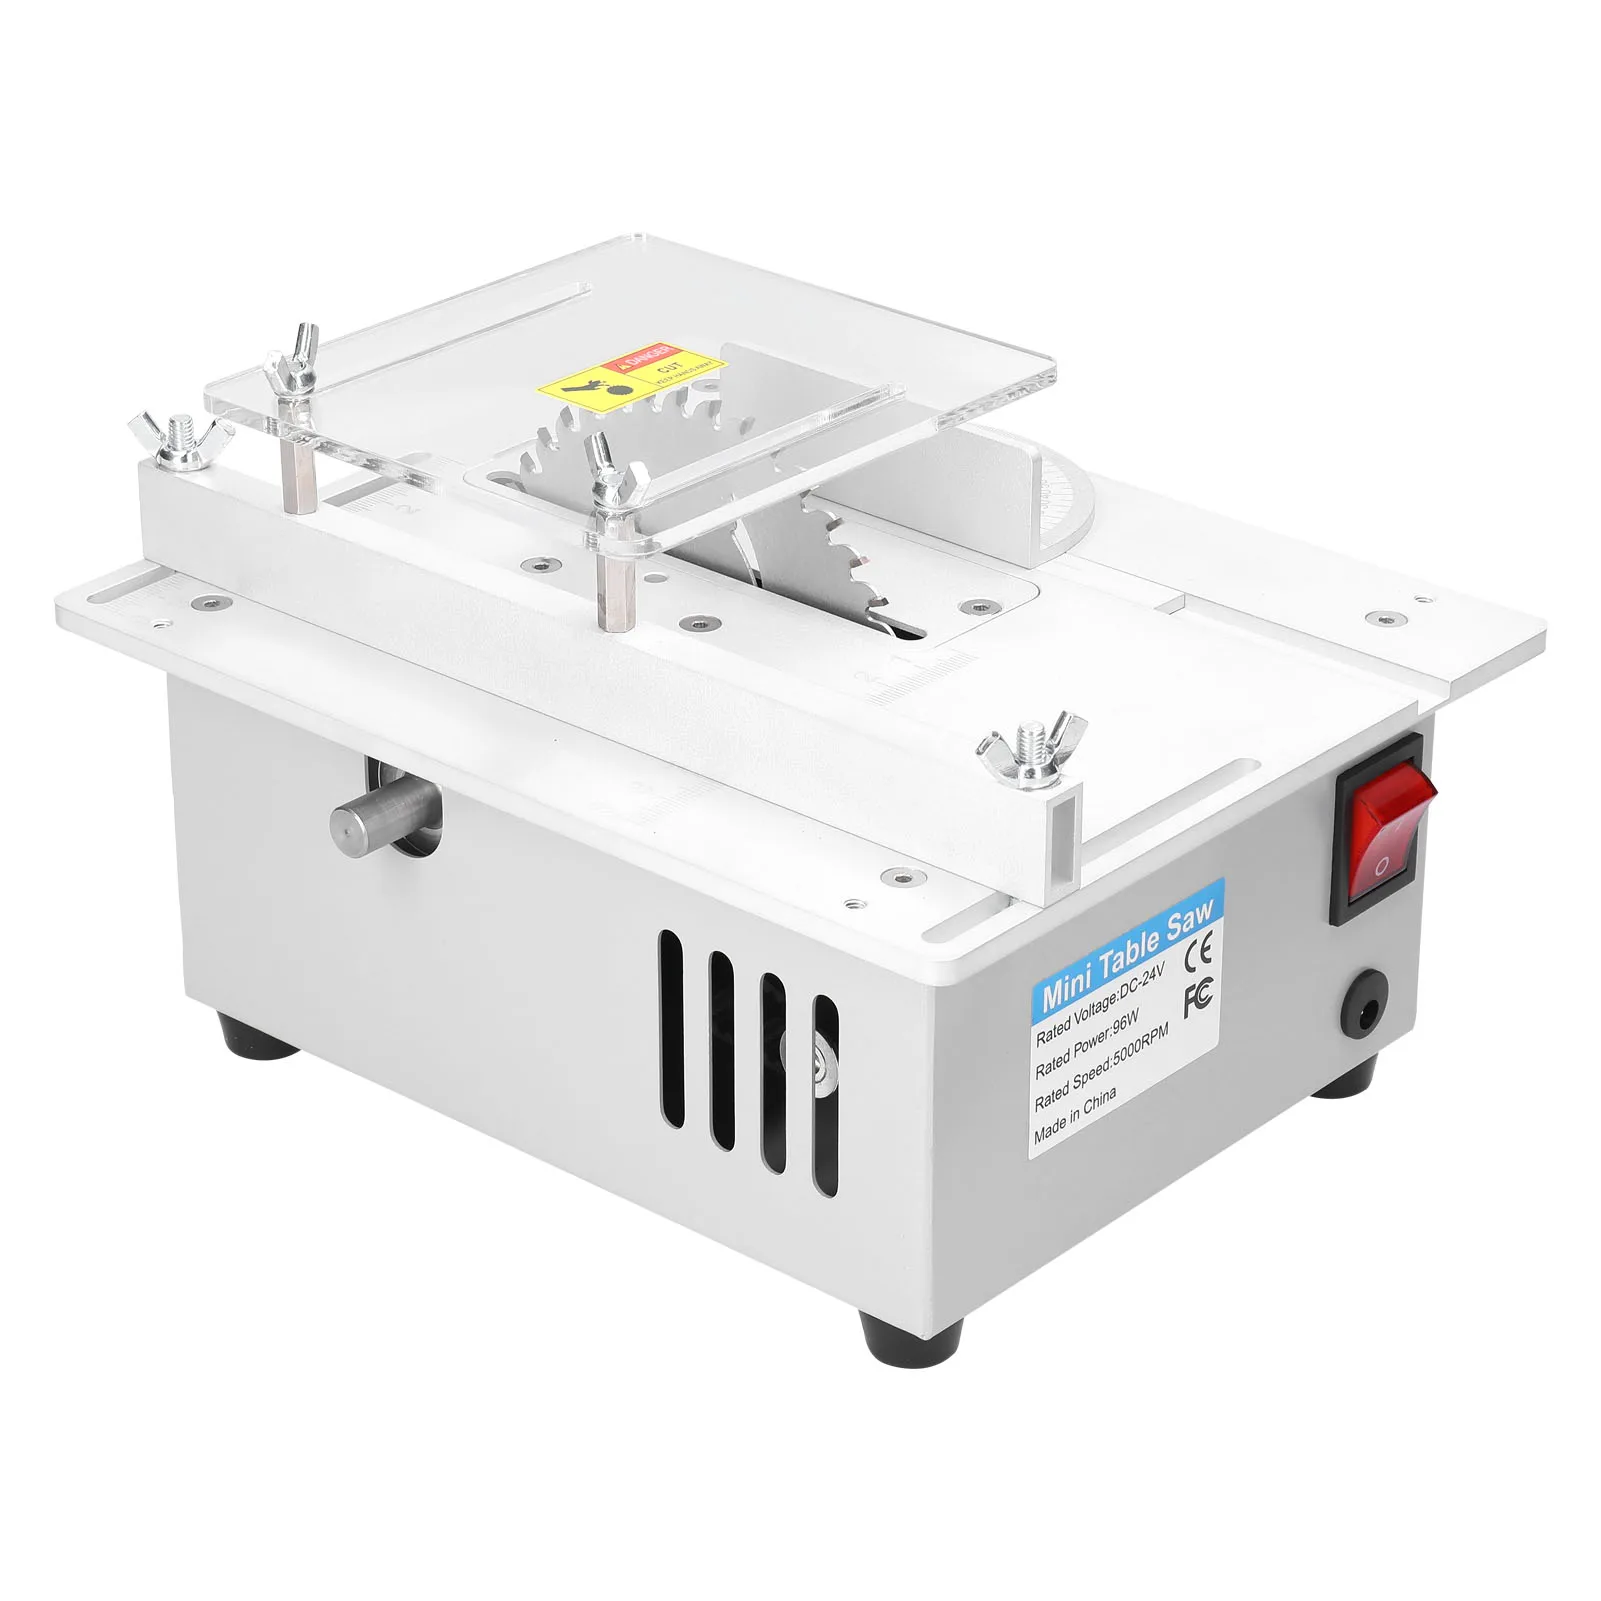 

Household DIY Cutting Tool T1 Mini Multifunctional Table Saw Electric Desktop Saws Small Woodworking Lathe Machine with Collet